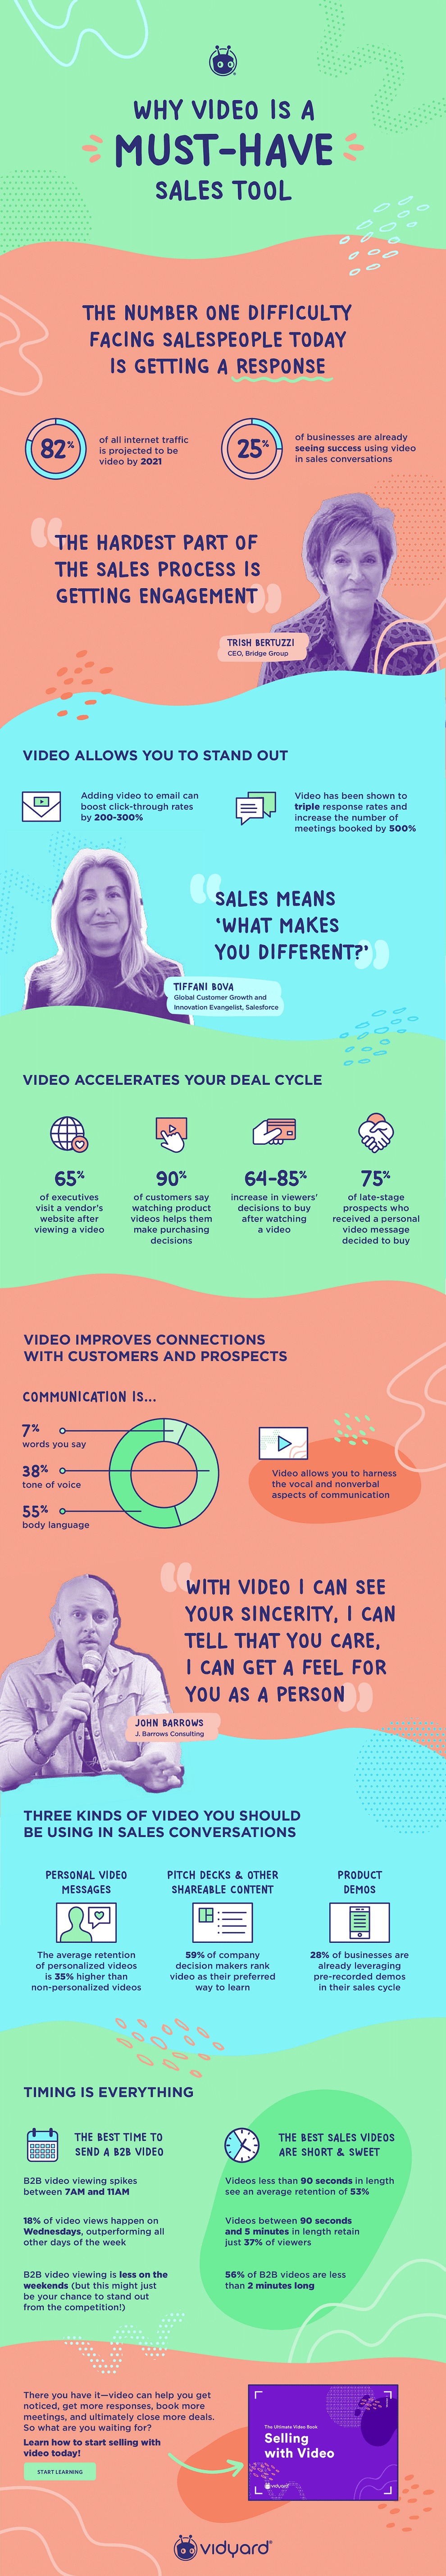 Infographic: Why Video is a Powerful Sales Tool